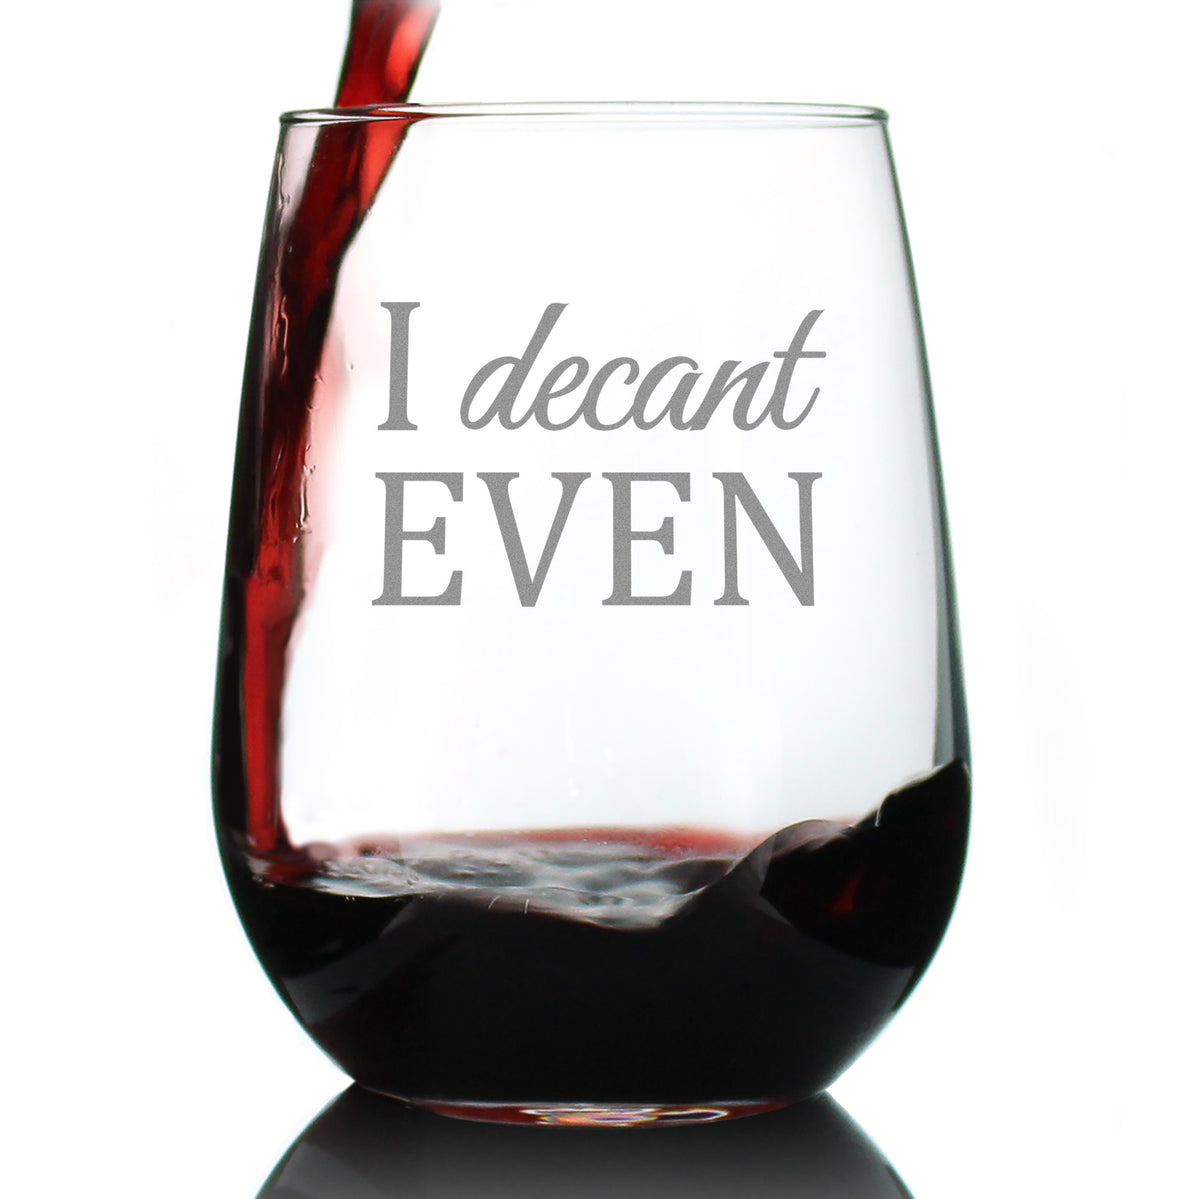 I Decant Even – Cute Funny Stemless Wine Glass, Large 17 Ounce, Etched Sayings, Gift Box